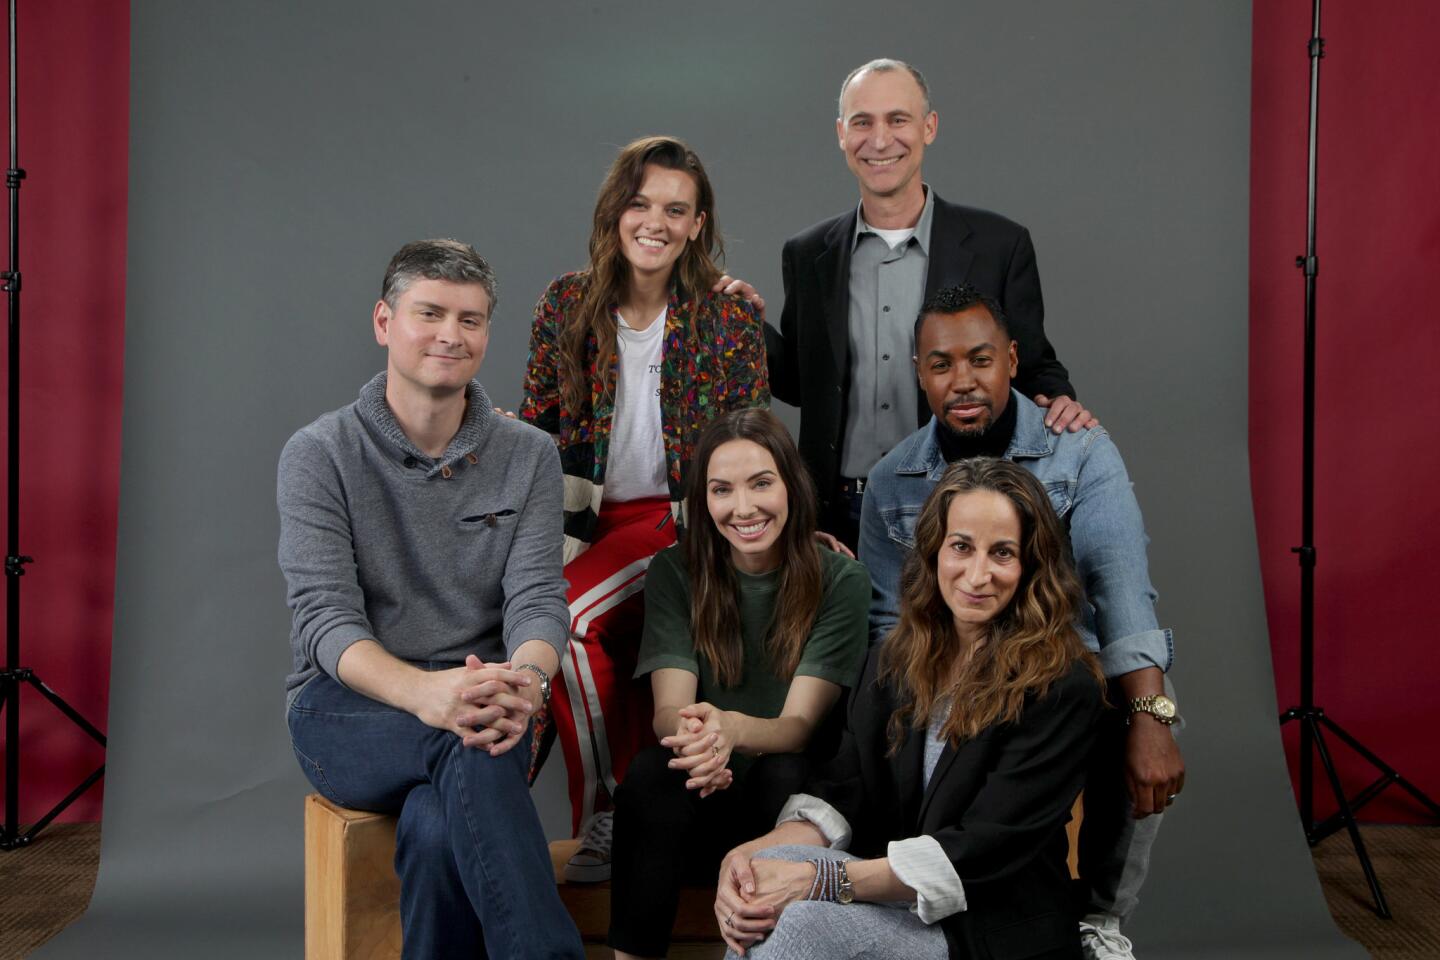 The Envelope's annual Emmy Roundtable invites TV showrunners to talk about the industry and their shows. Clockwise from left: Mike Schur ("The Good Place"), Frankie Shaw ("SMILF"), Joel Fields ("The Americans"), Prentice Penny ("Insecure"), Laeta Kalogridis ("Altered Carbon") and Whitney Cummings ("Roseanne").